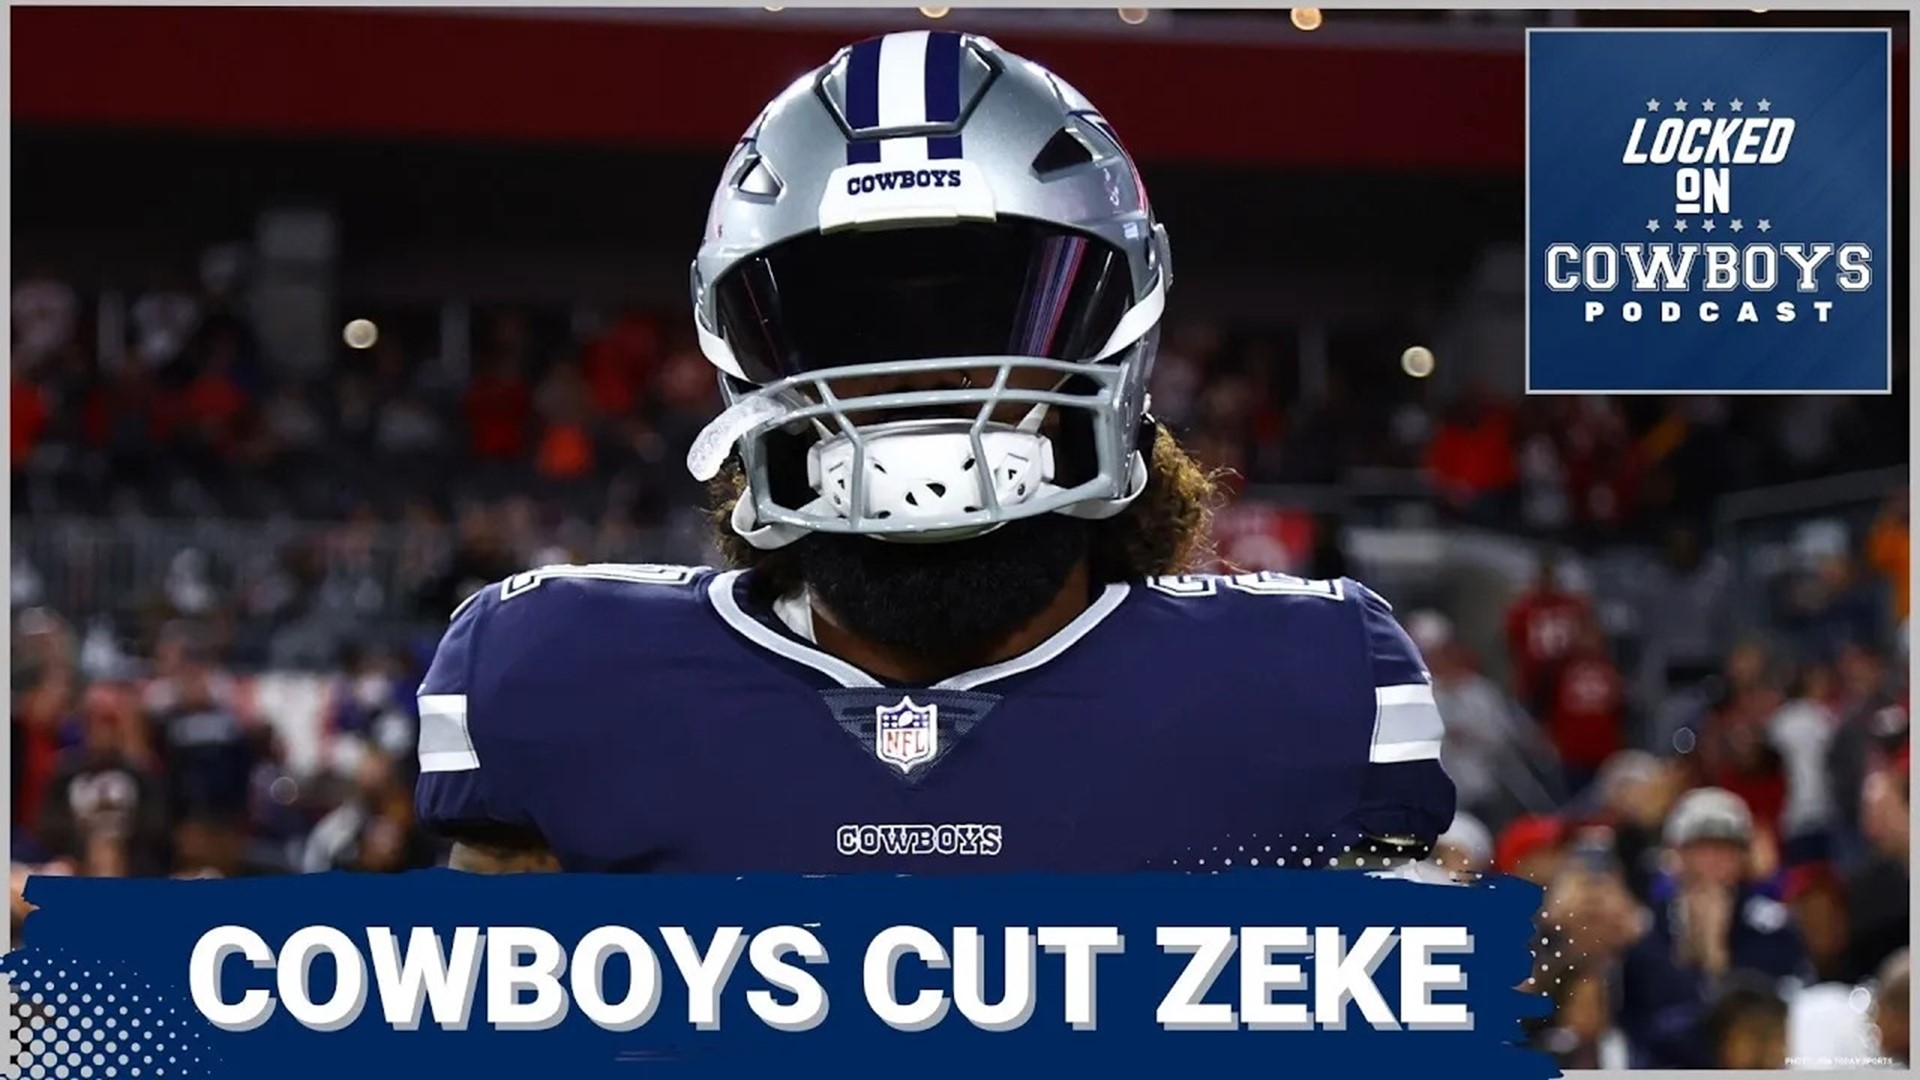 Marcus Mosher and Landon McCool discuss the Dallas Cowboys releasing running back Ezekiel Elliott. They talk about why the team decided to move on.